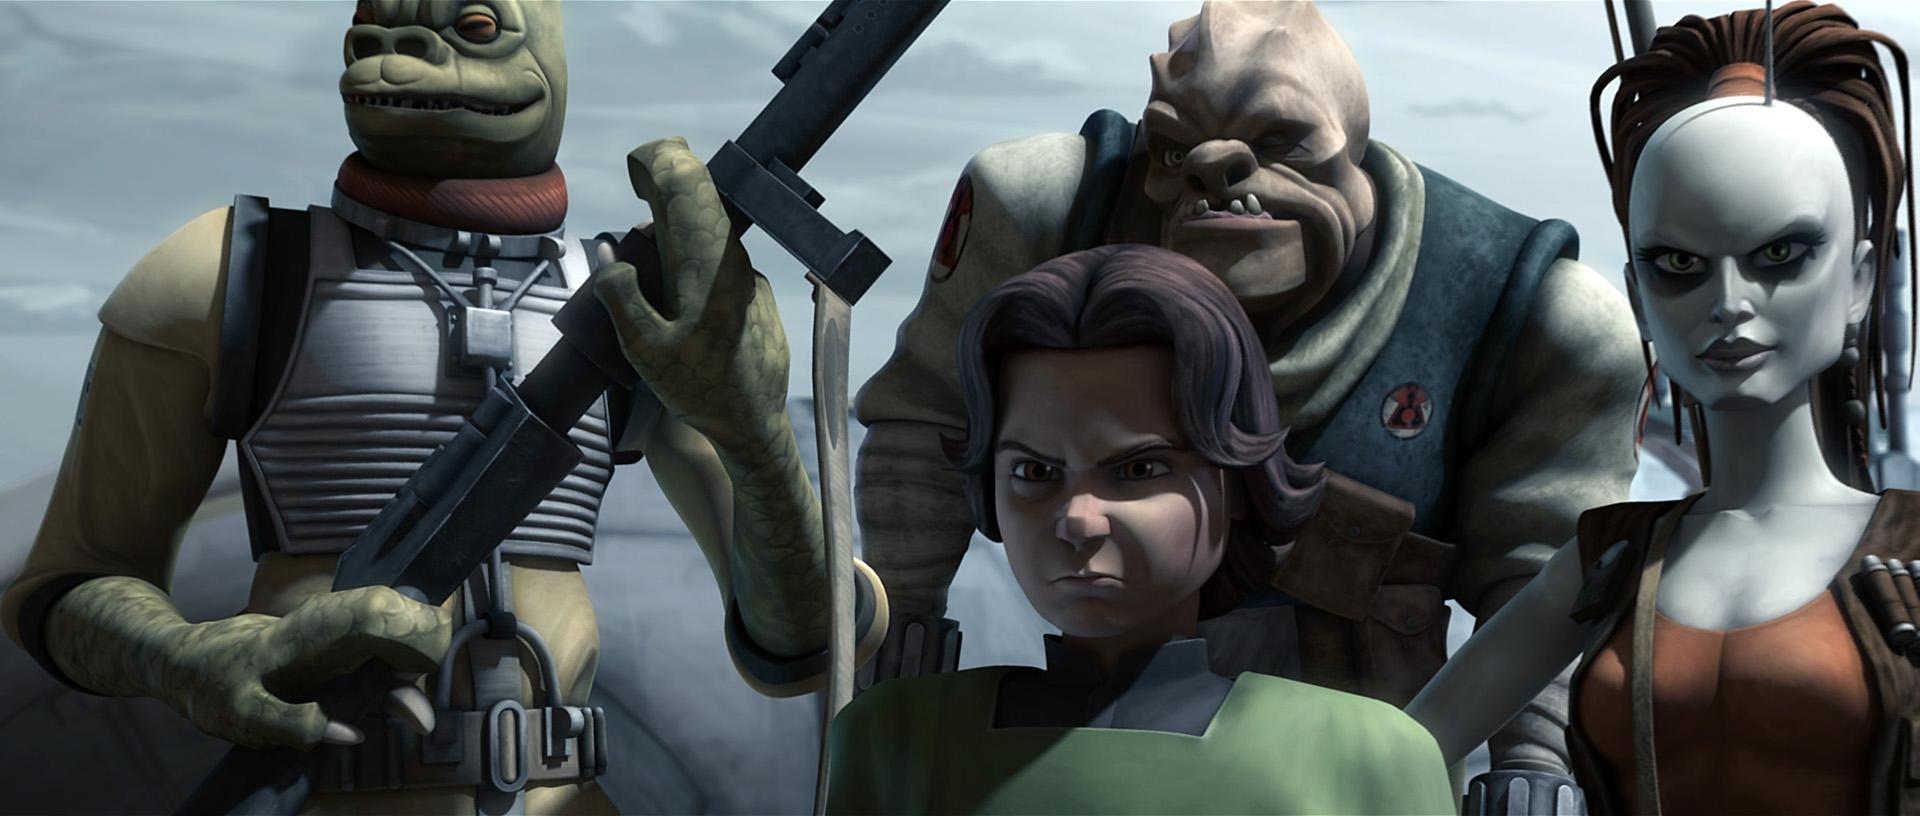 Boba Fett last appeared in the Star Wars universe as a young boy in The Clone Wars series.